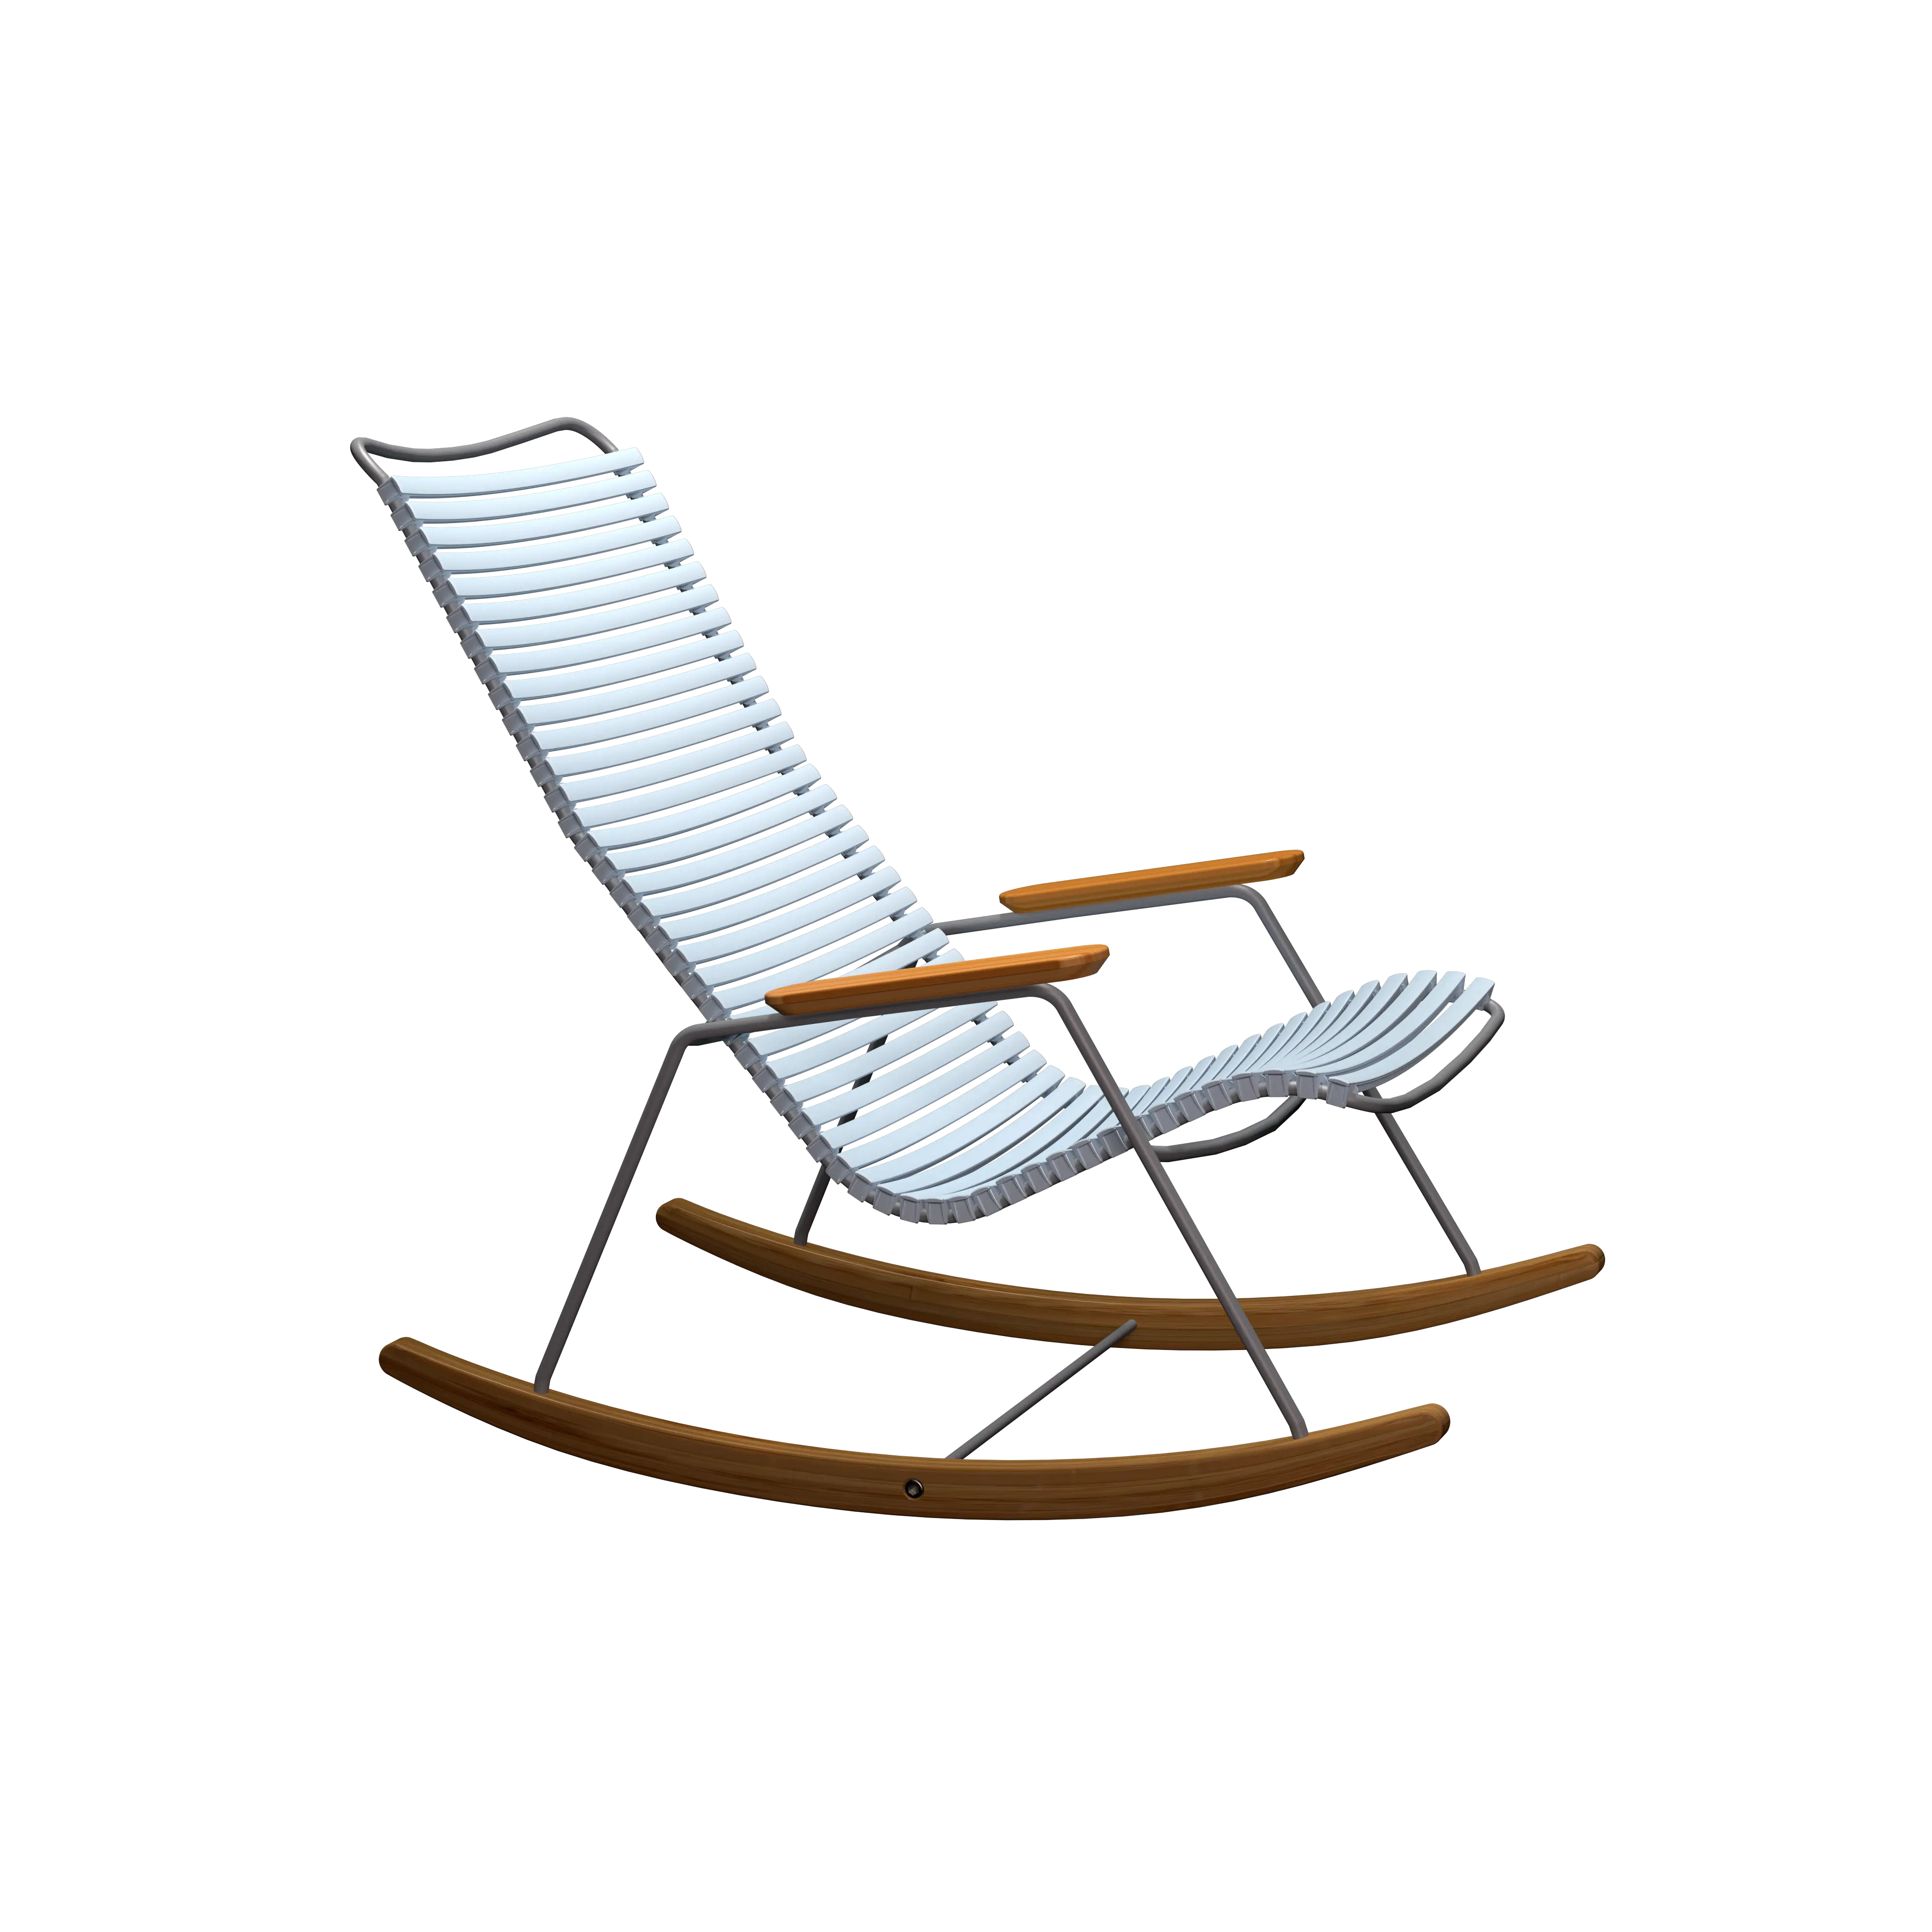 Click rocking chair - Dusty light blue, bamboo armrests